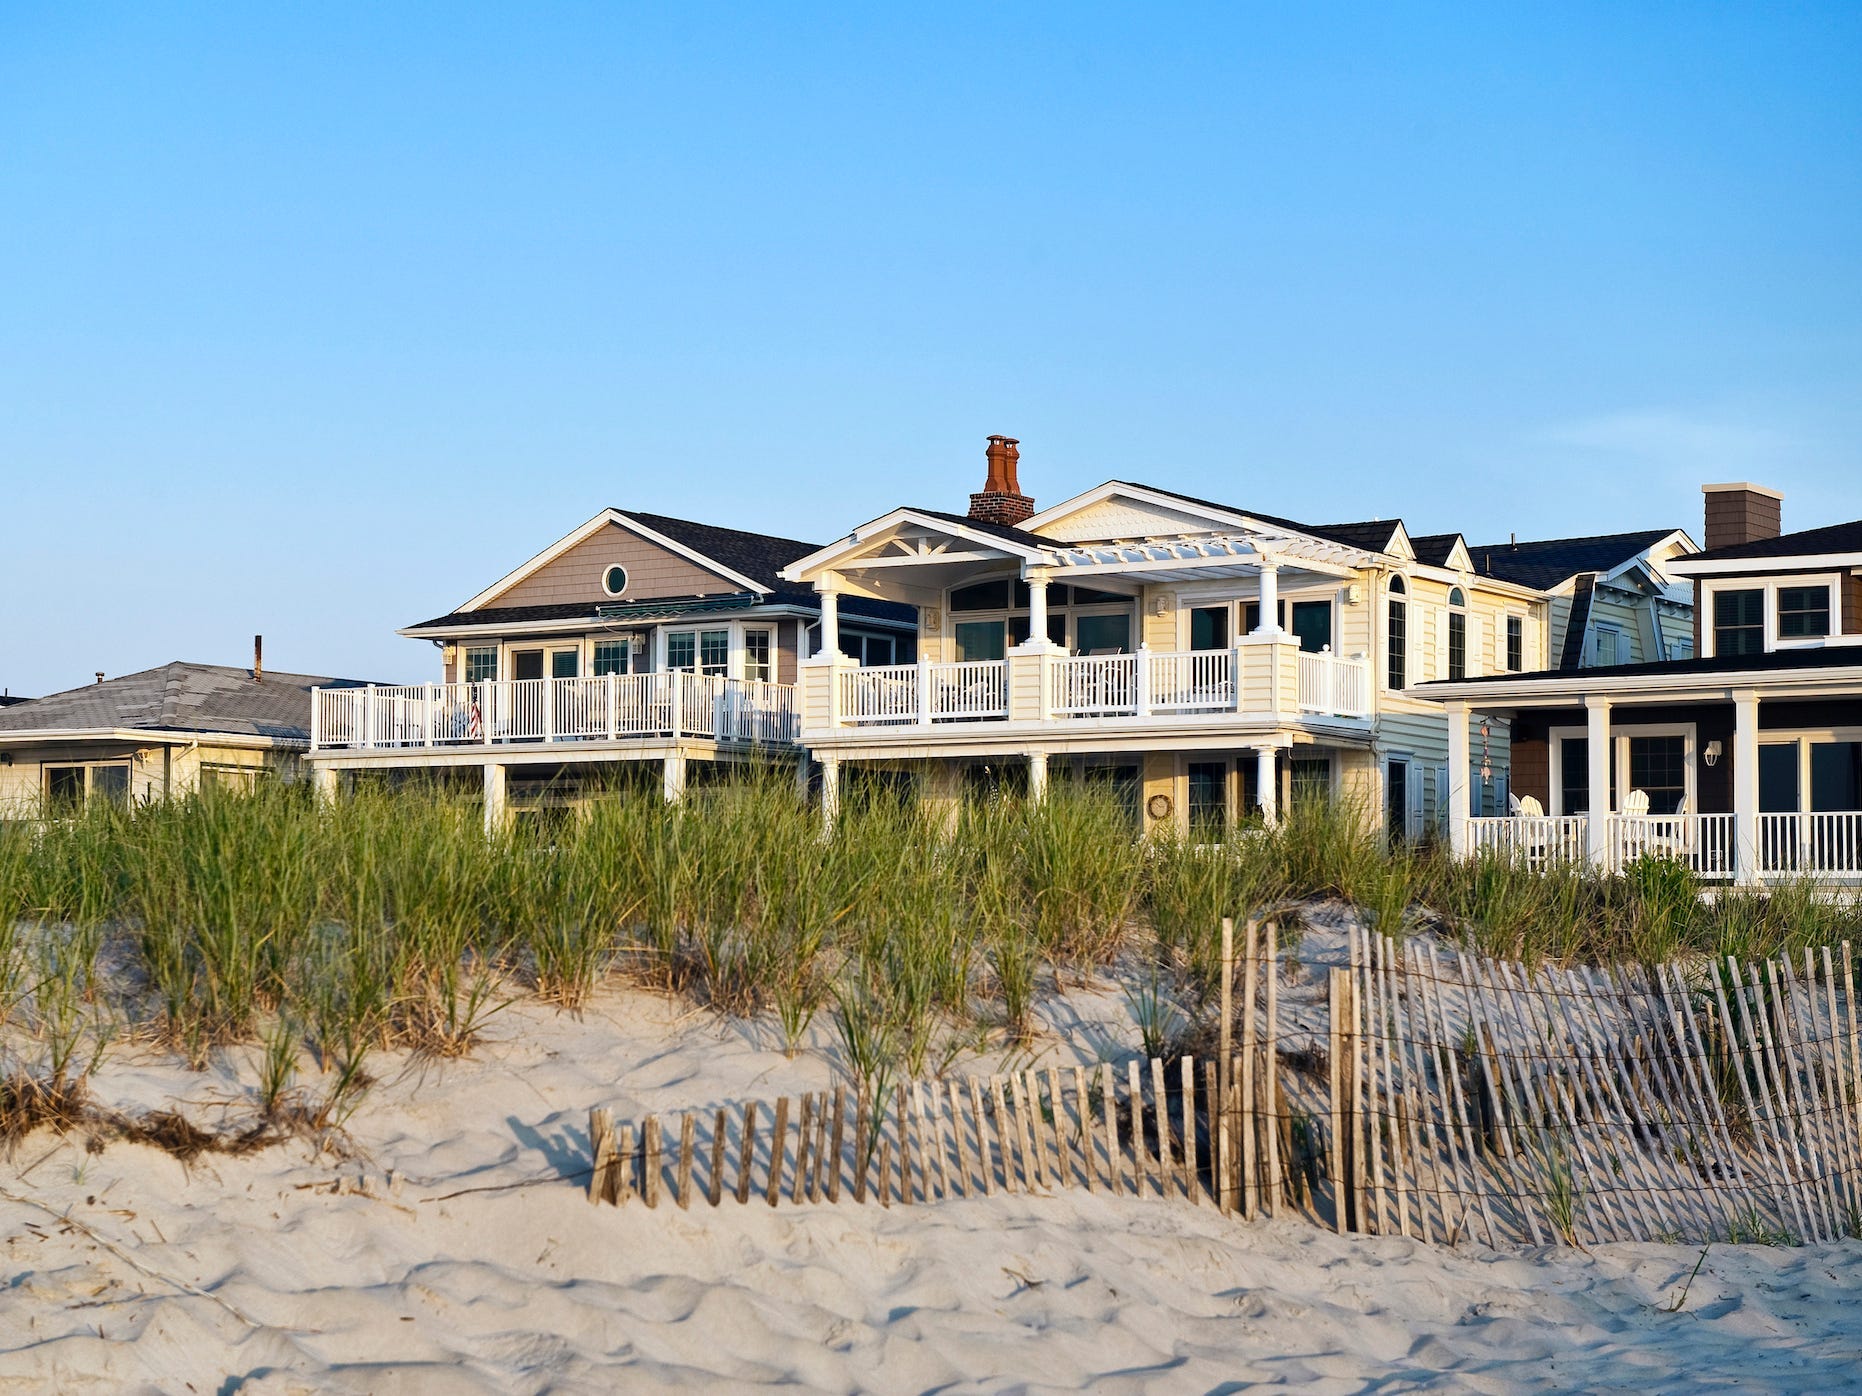 Beach houses pictured with sand dunes in Ocean City, New Jersey.